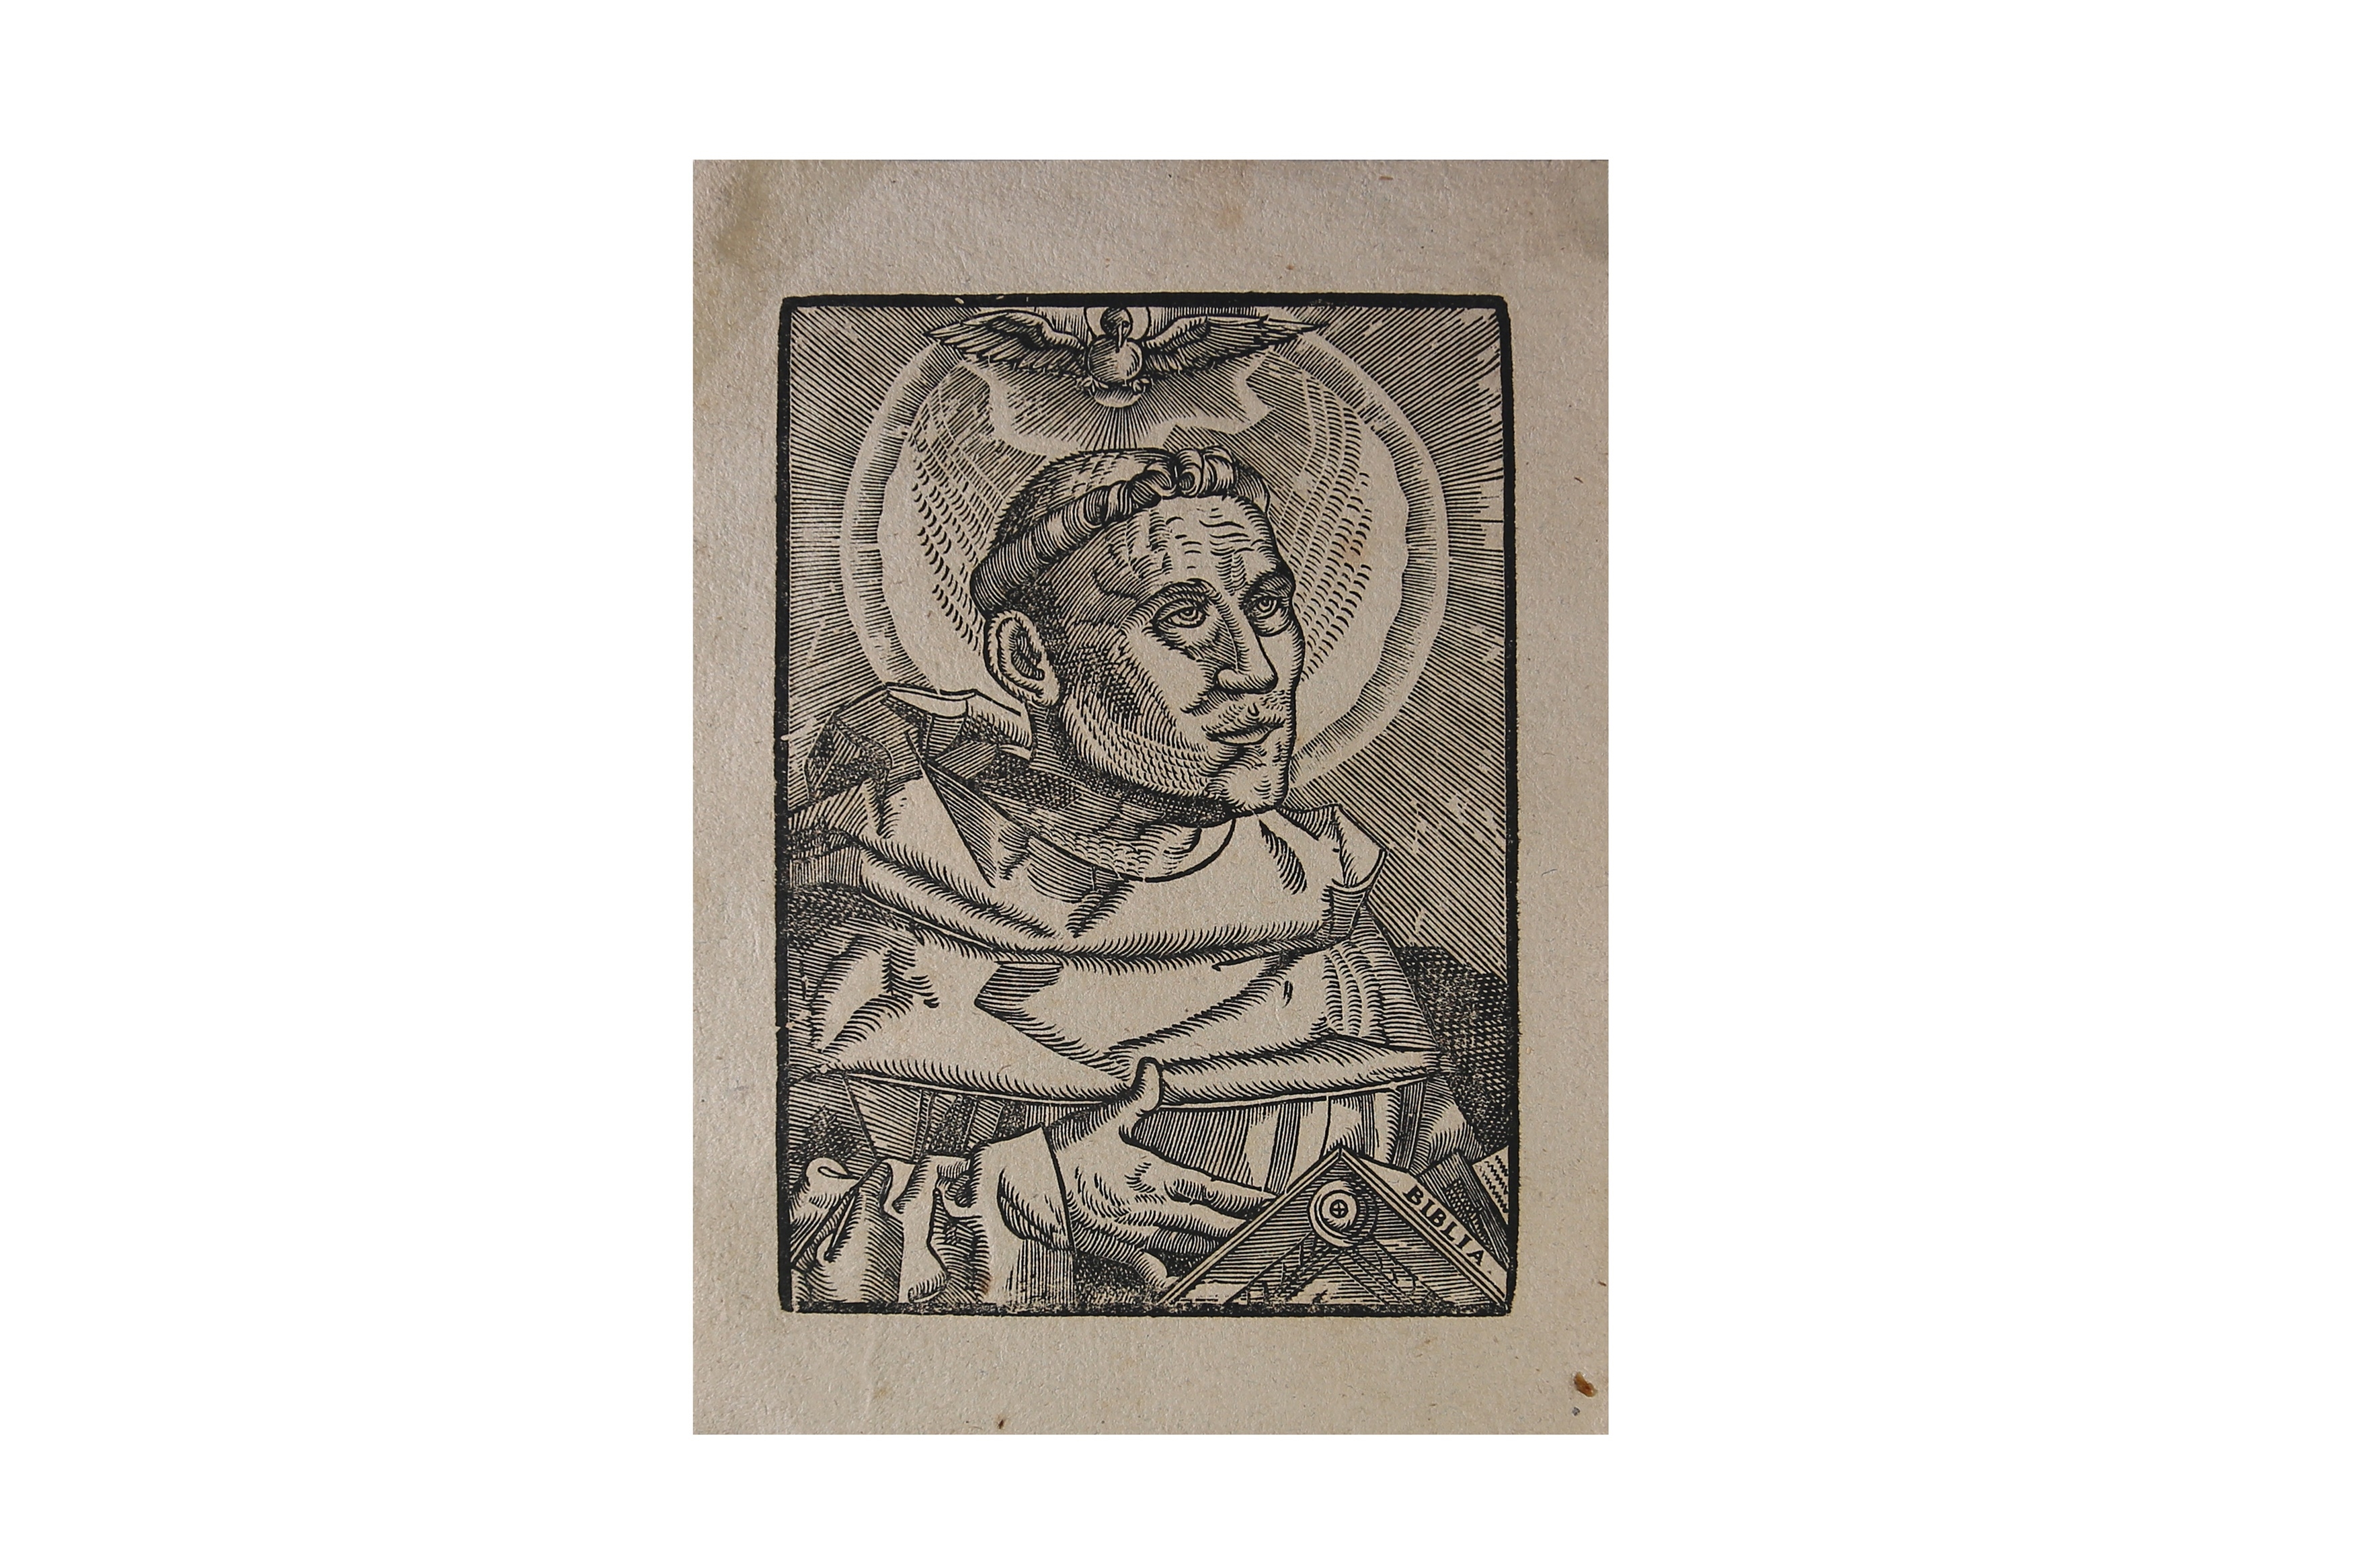 Artwork by Hans Baldung Grien, Martin Luther als Augustinermönch, Made of woodcut on laid paper